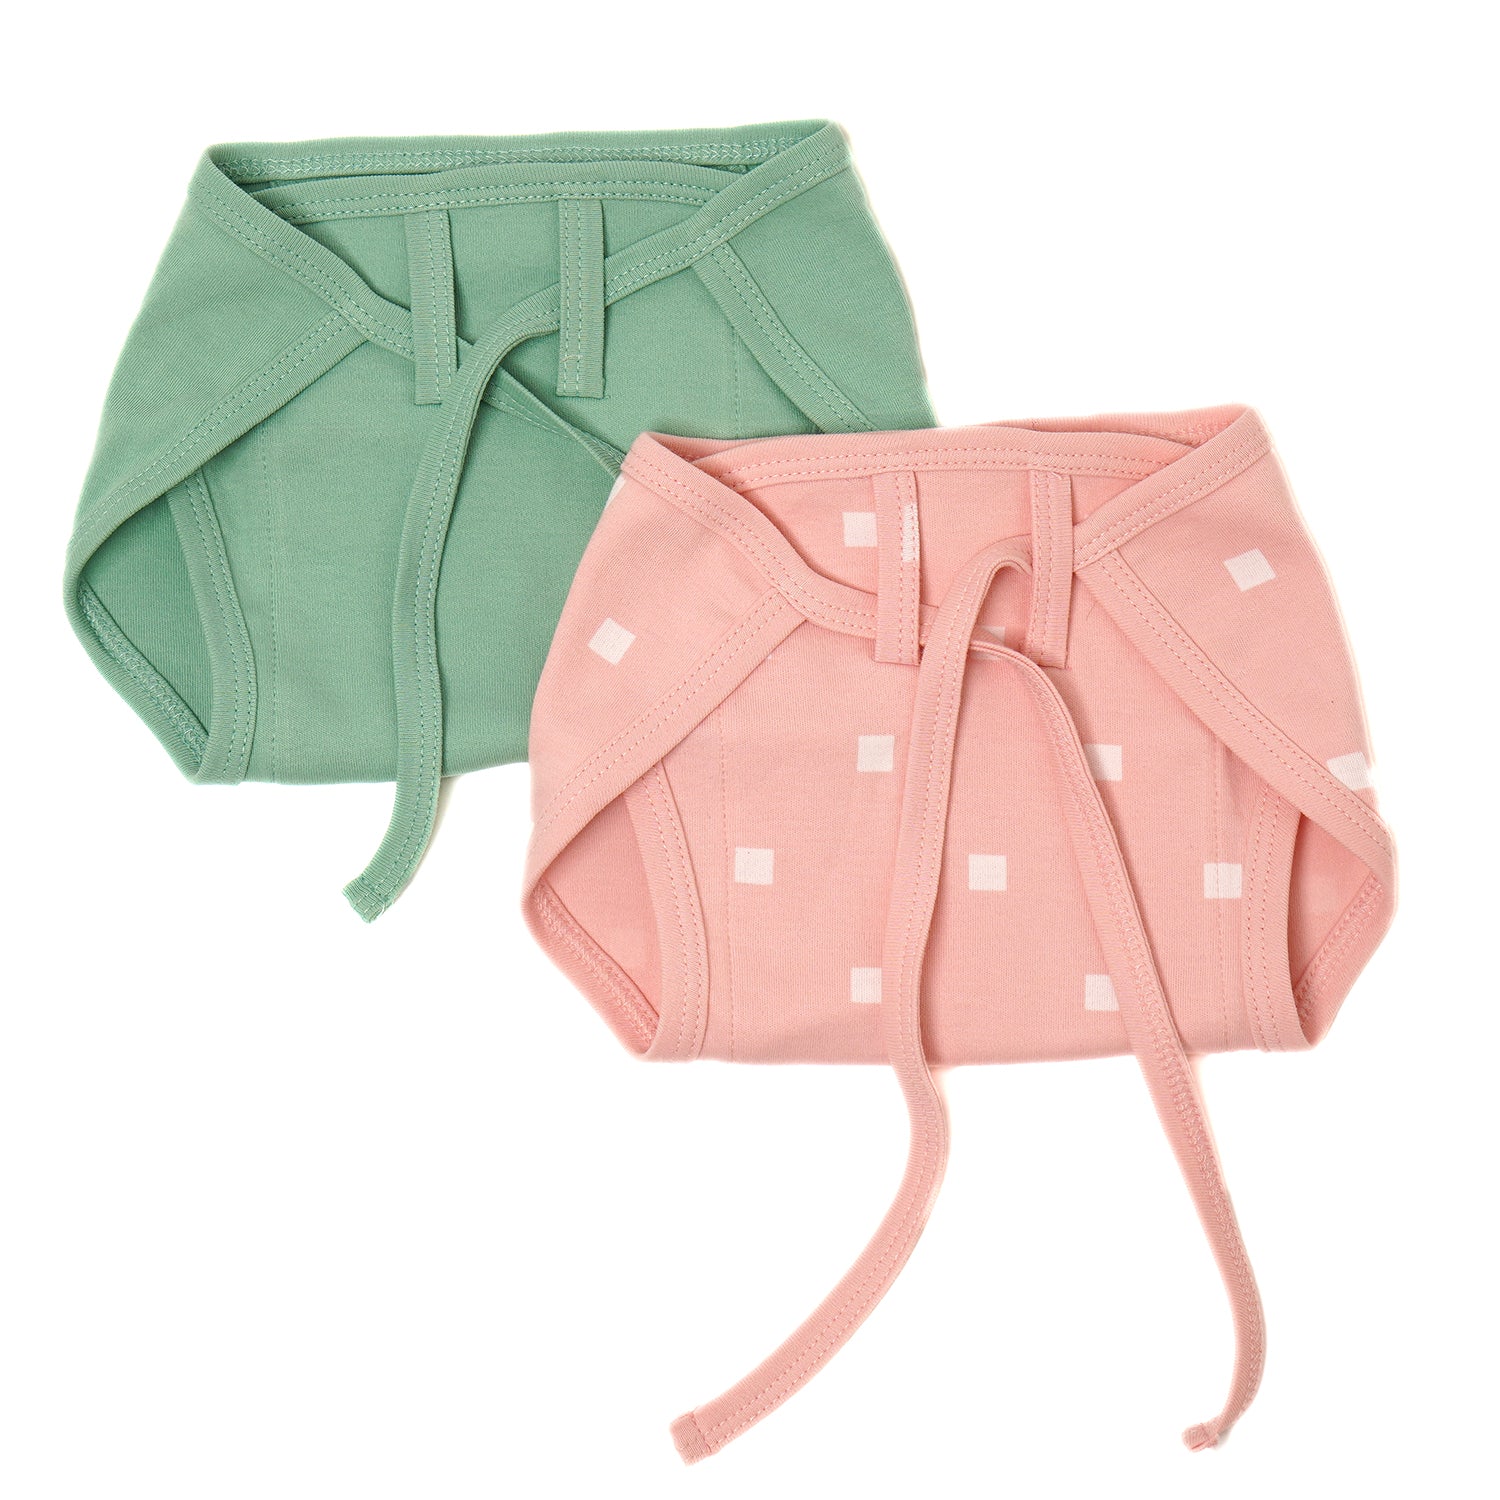 100% Cotton Jersey Nappies [Set - 1] Pack of 2 Solid Green & Pink Polka